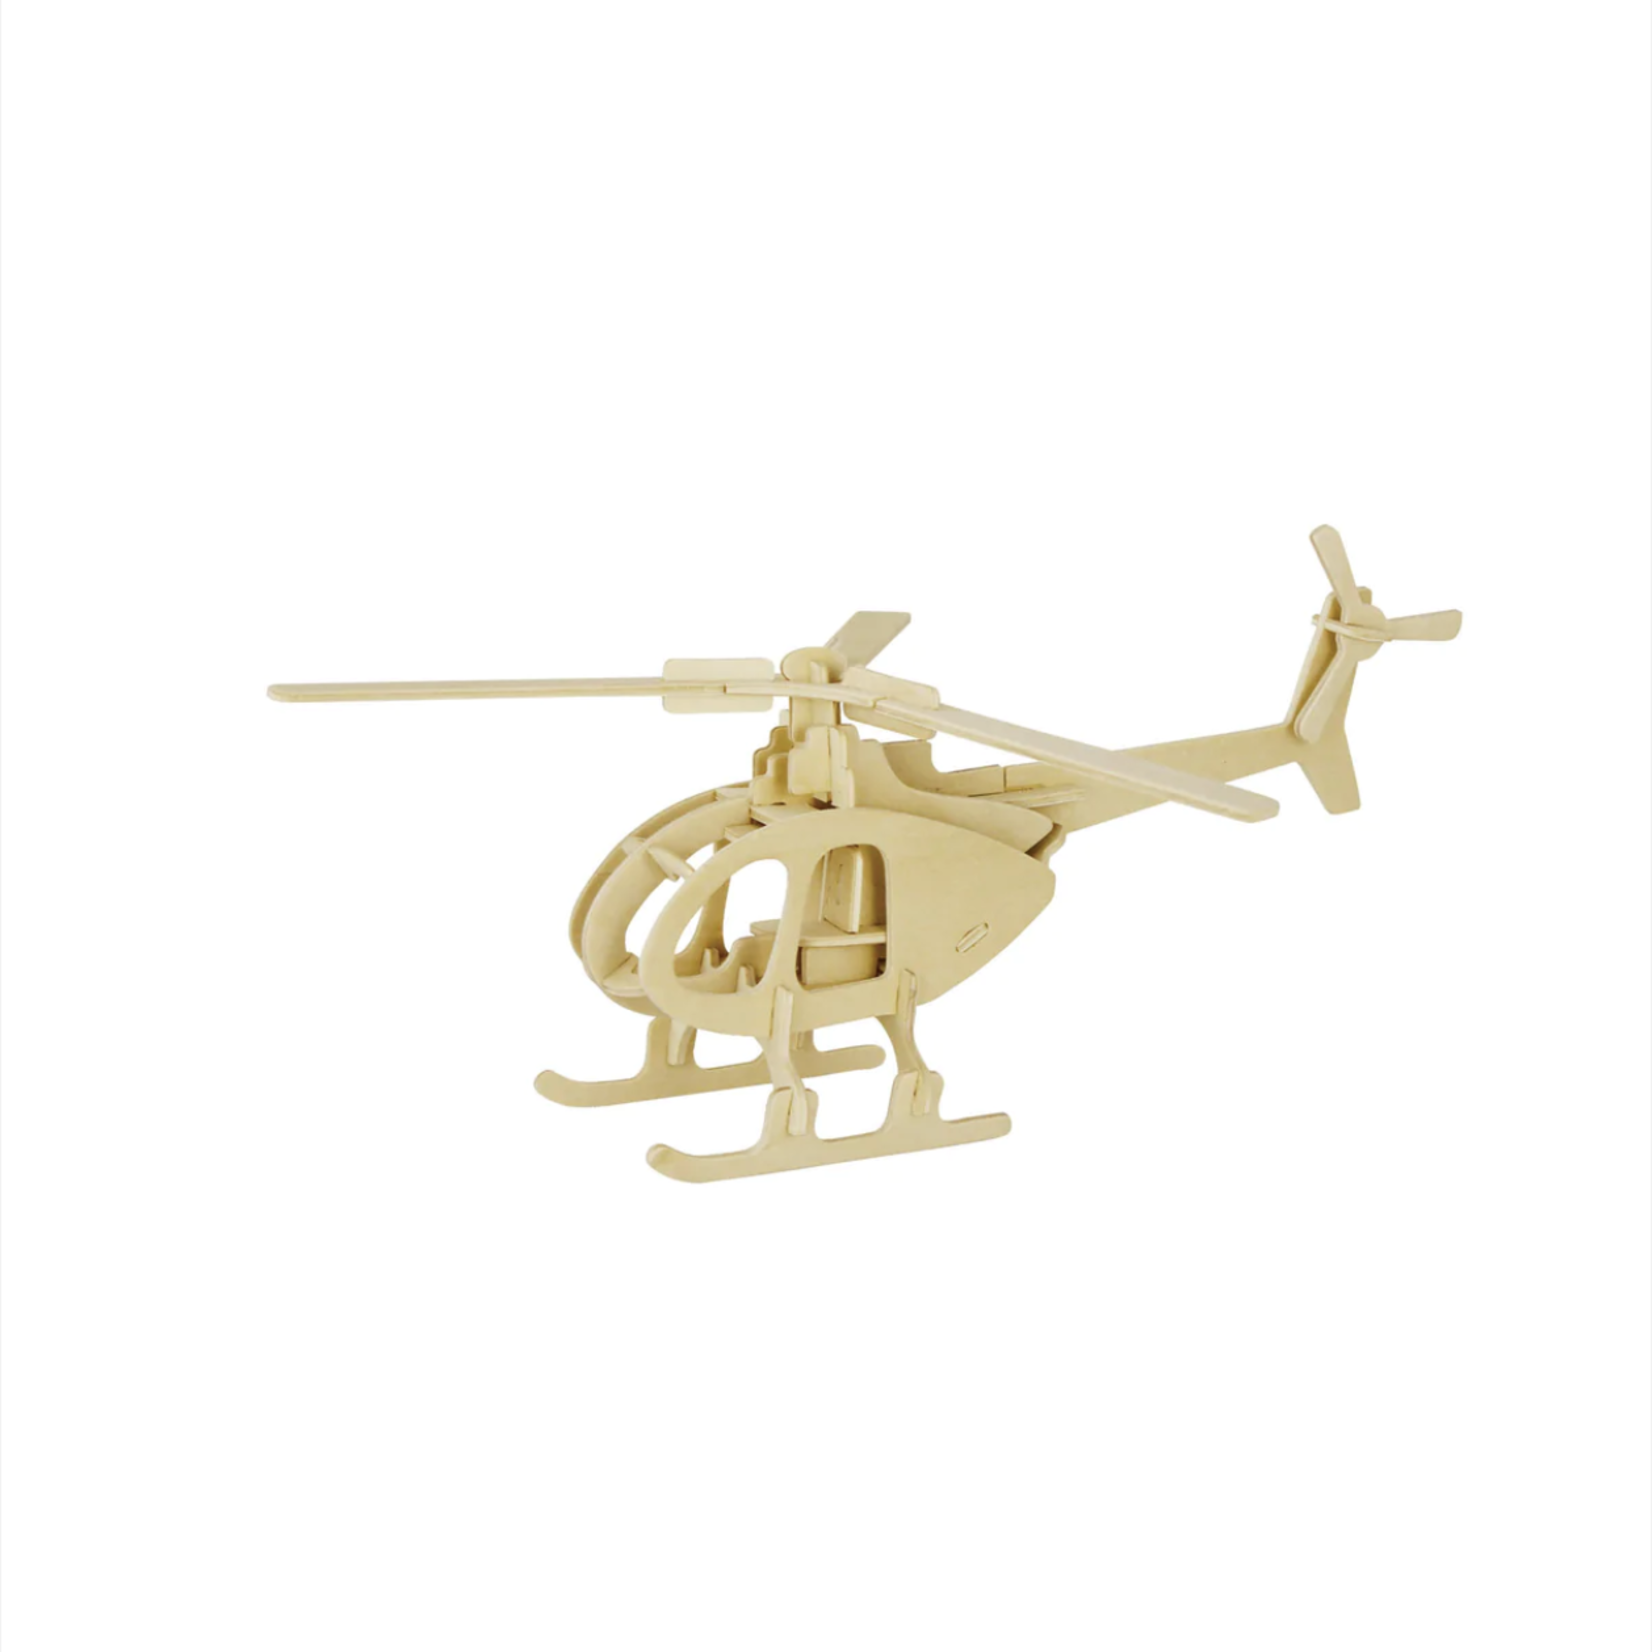 HANDS CRAFT DIY 3D WOODEN PUZZLE HELICOPTER